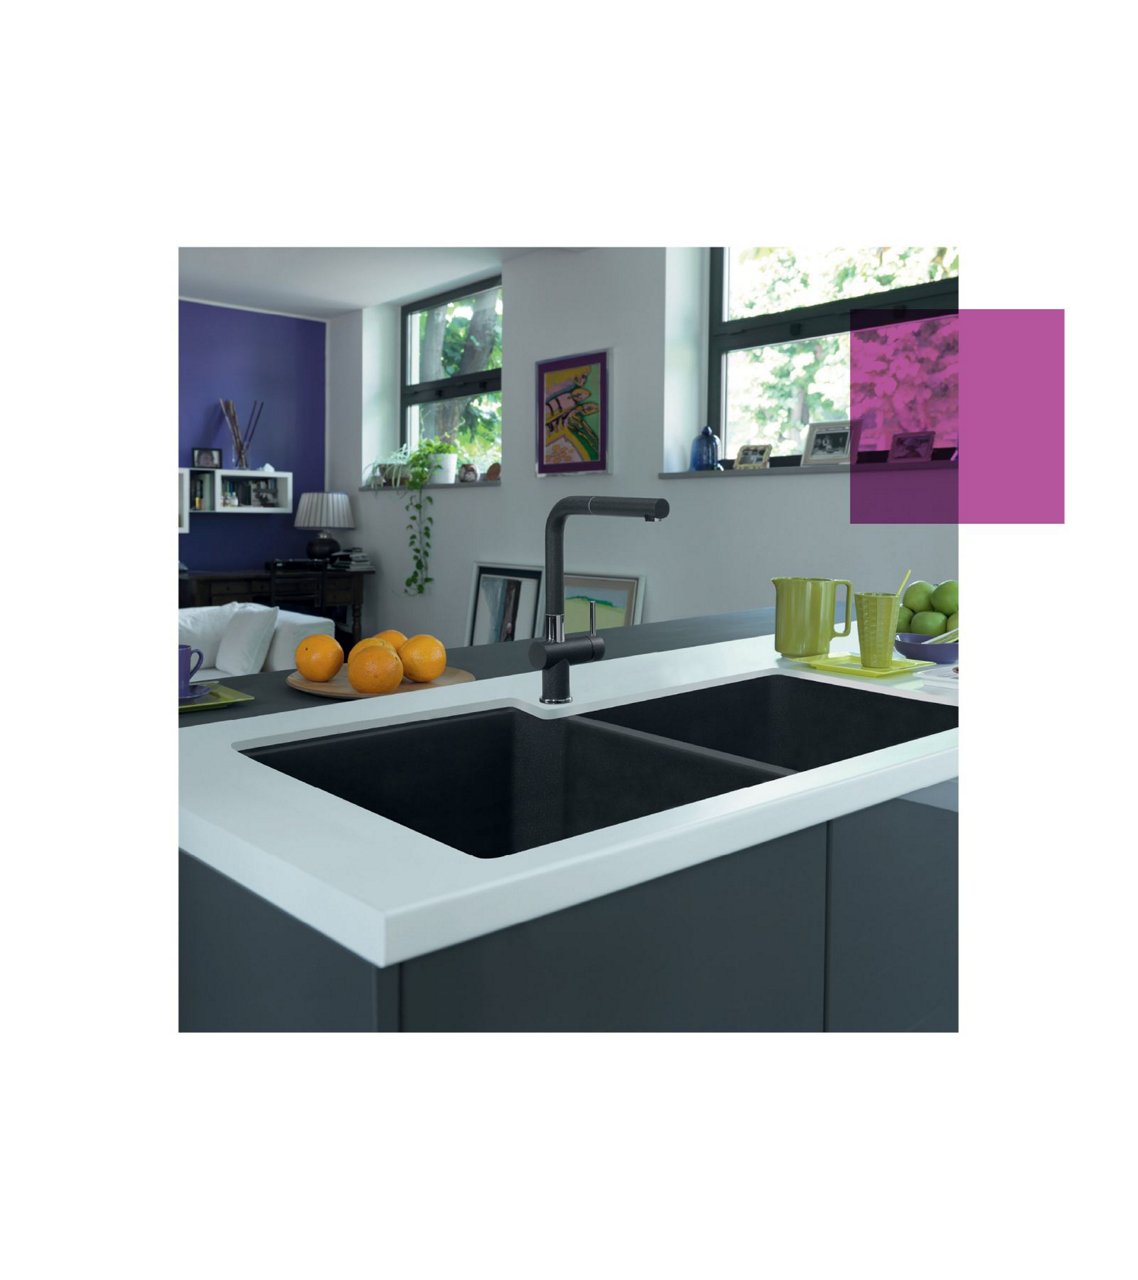 Kindred double bowl matte black granite sink with a matching black faucet in a kitchen island